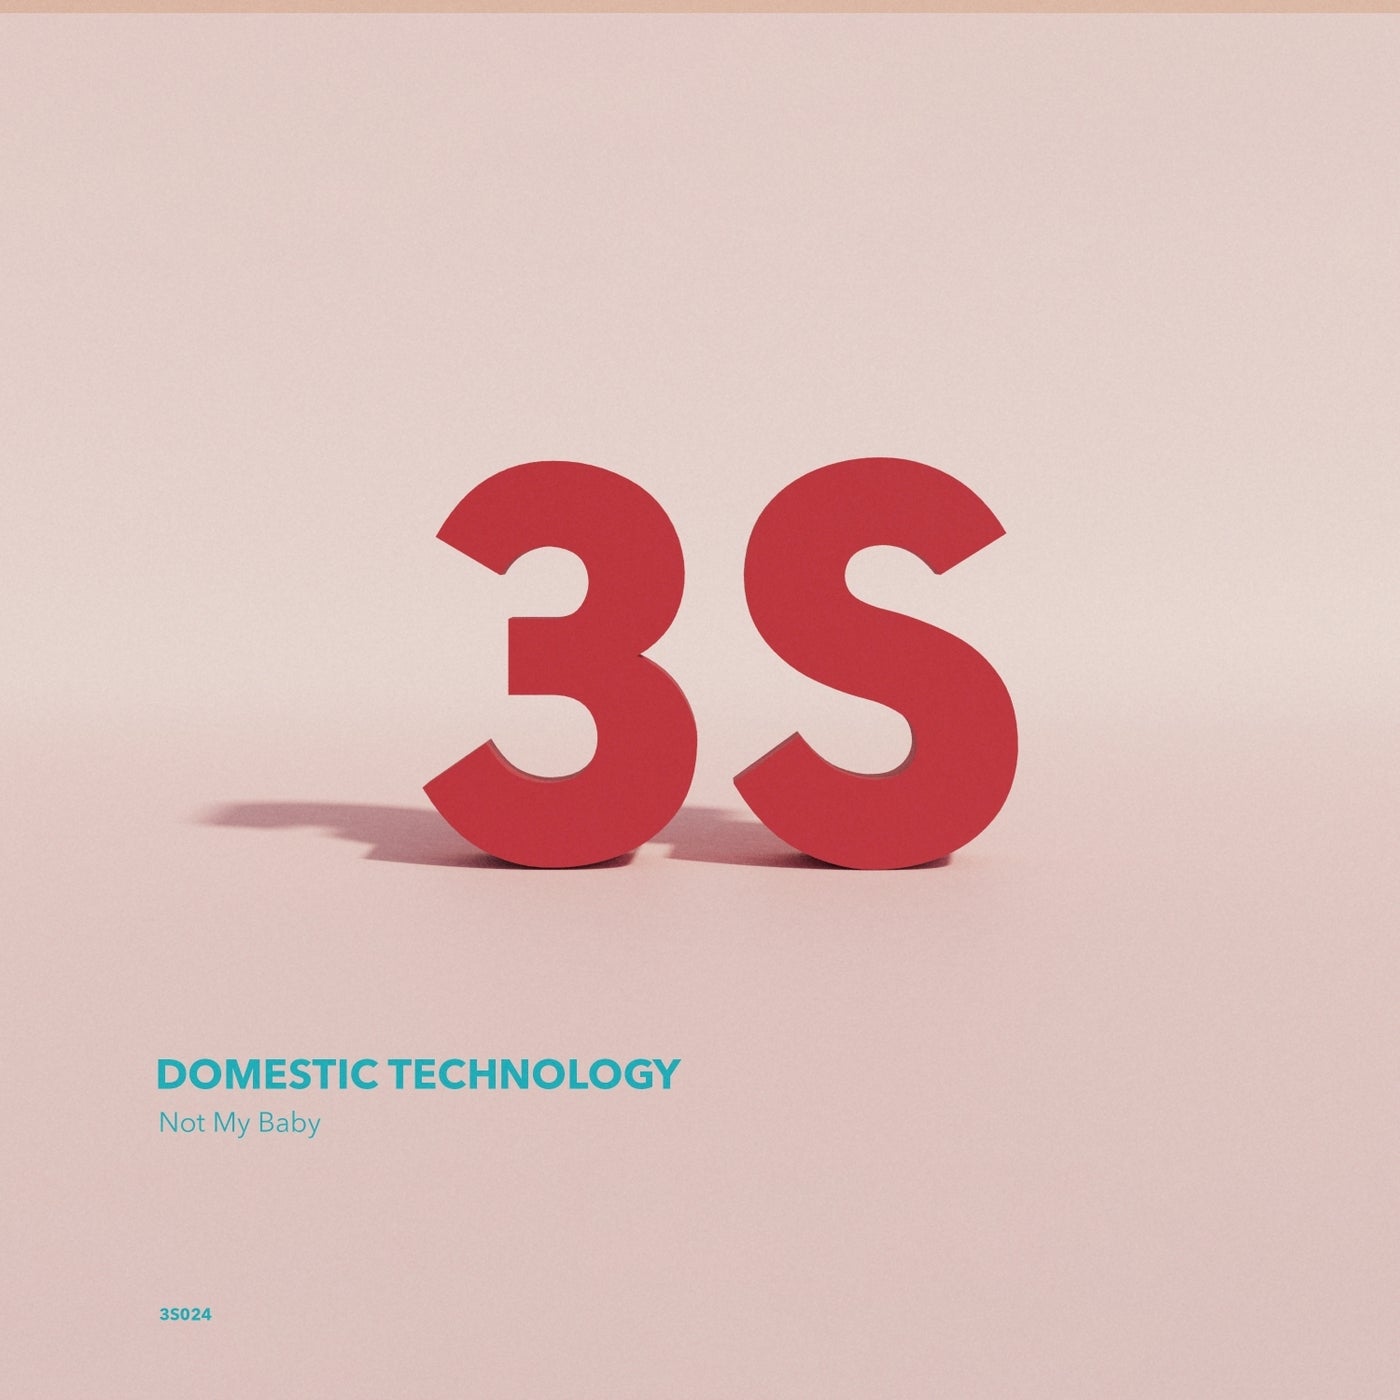 Domestic Technology - Discover [3S008]